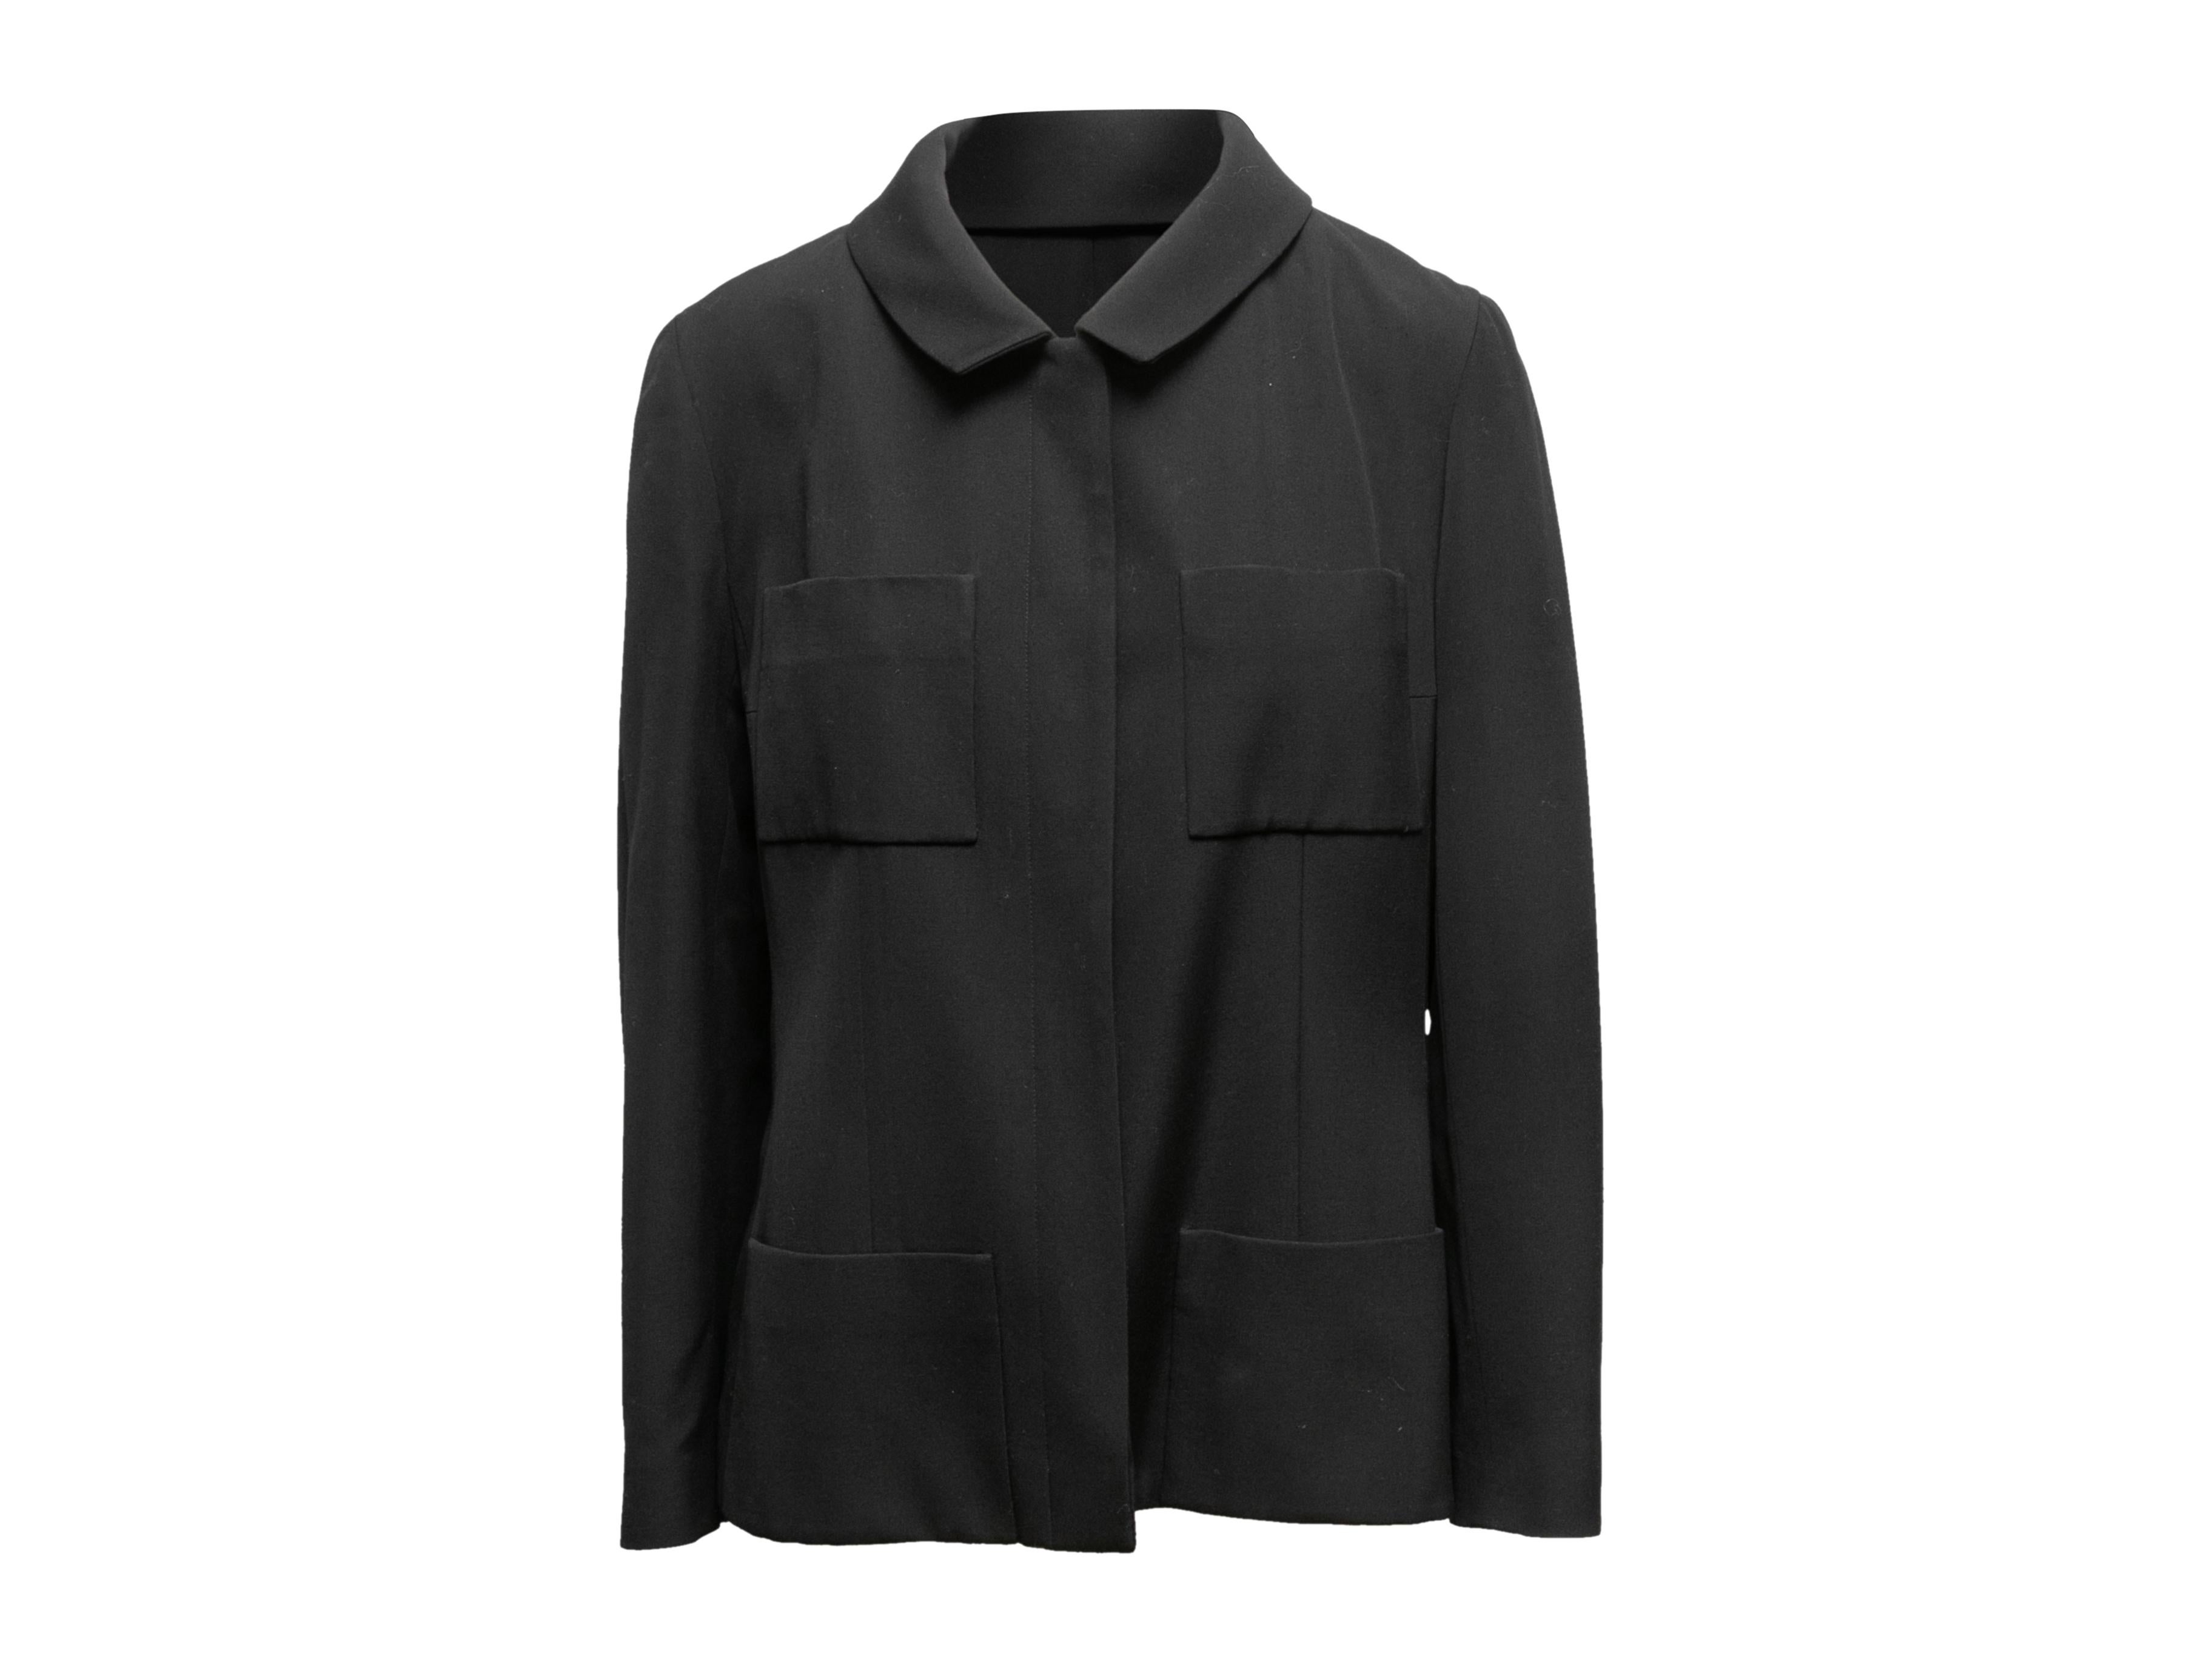 Vintage black wool jacket by Chanel. From the Spring/Summer 2001 Collection. Pointed collar. Four pockets. Concealed front closure. 36